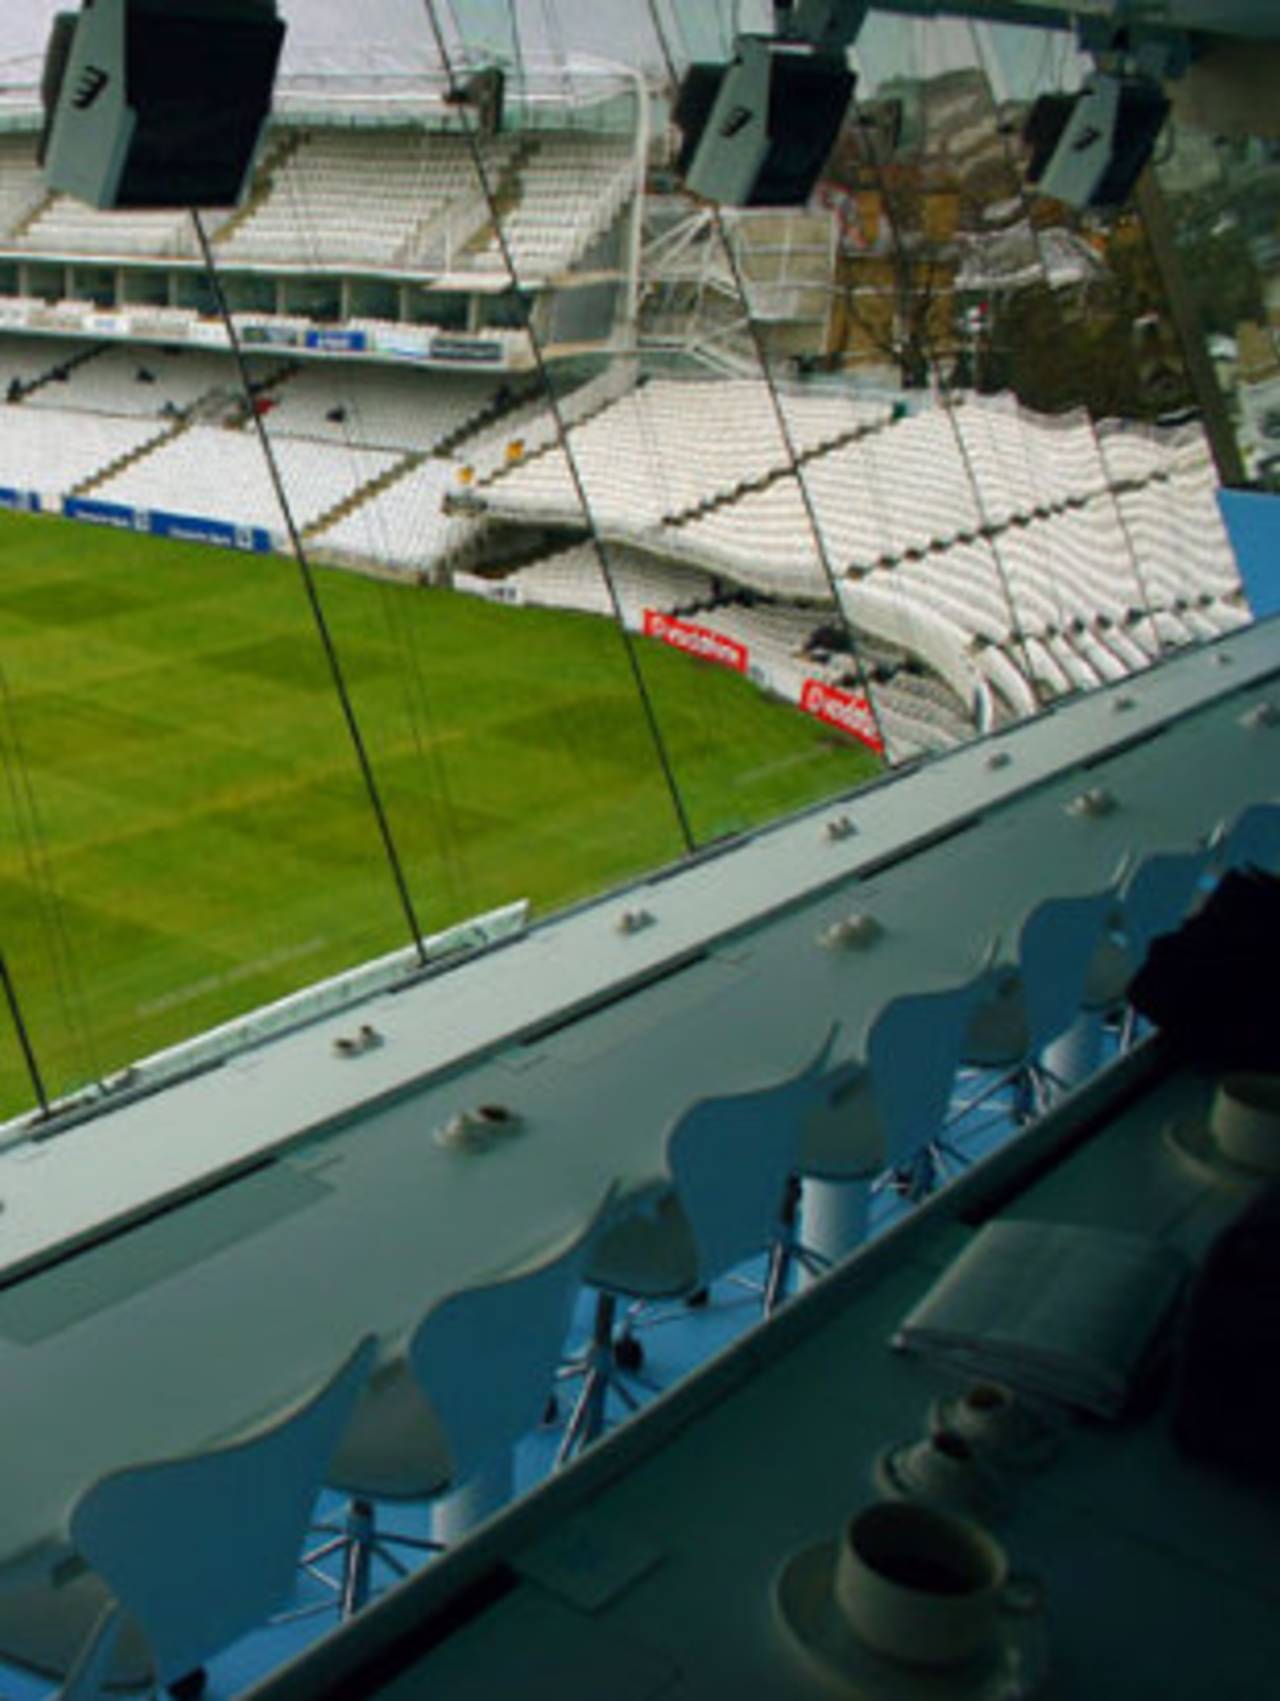 The view from the NatWest media centre at Lord's